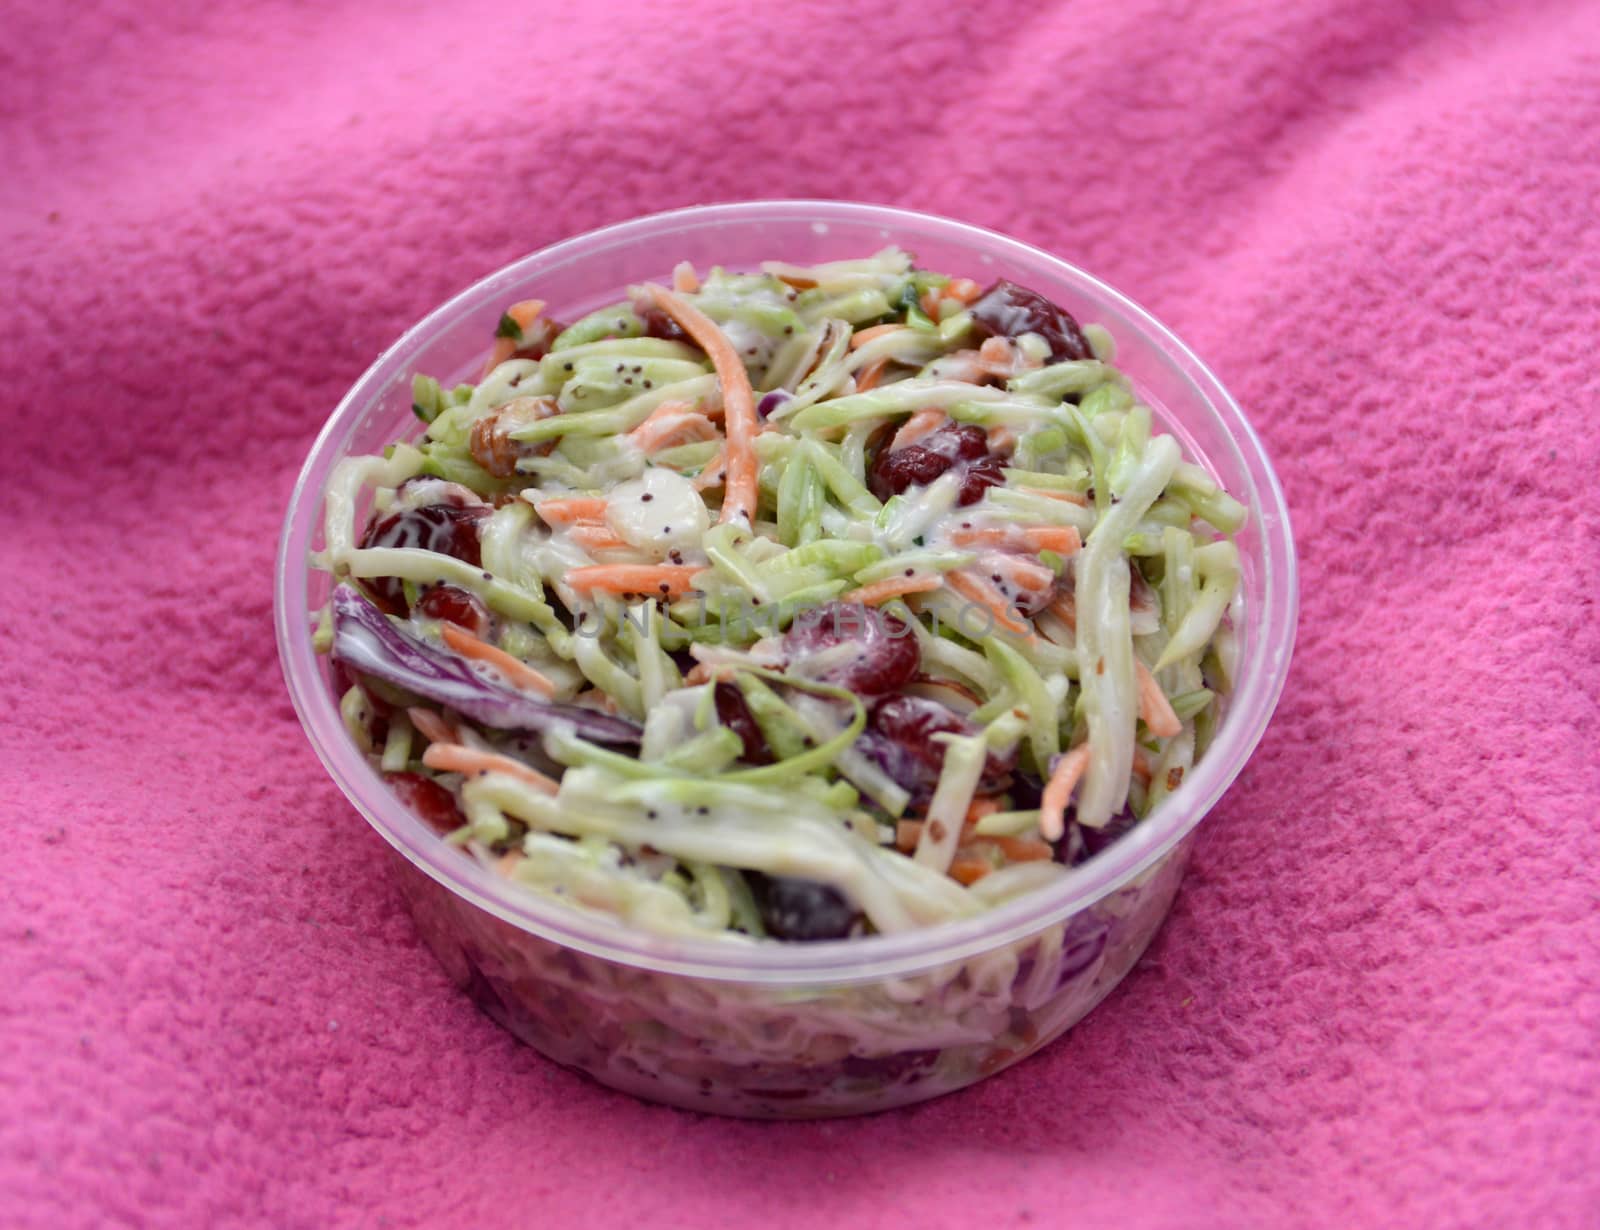 coleslaw in a to-go container by ftlaudgirl